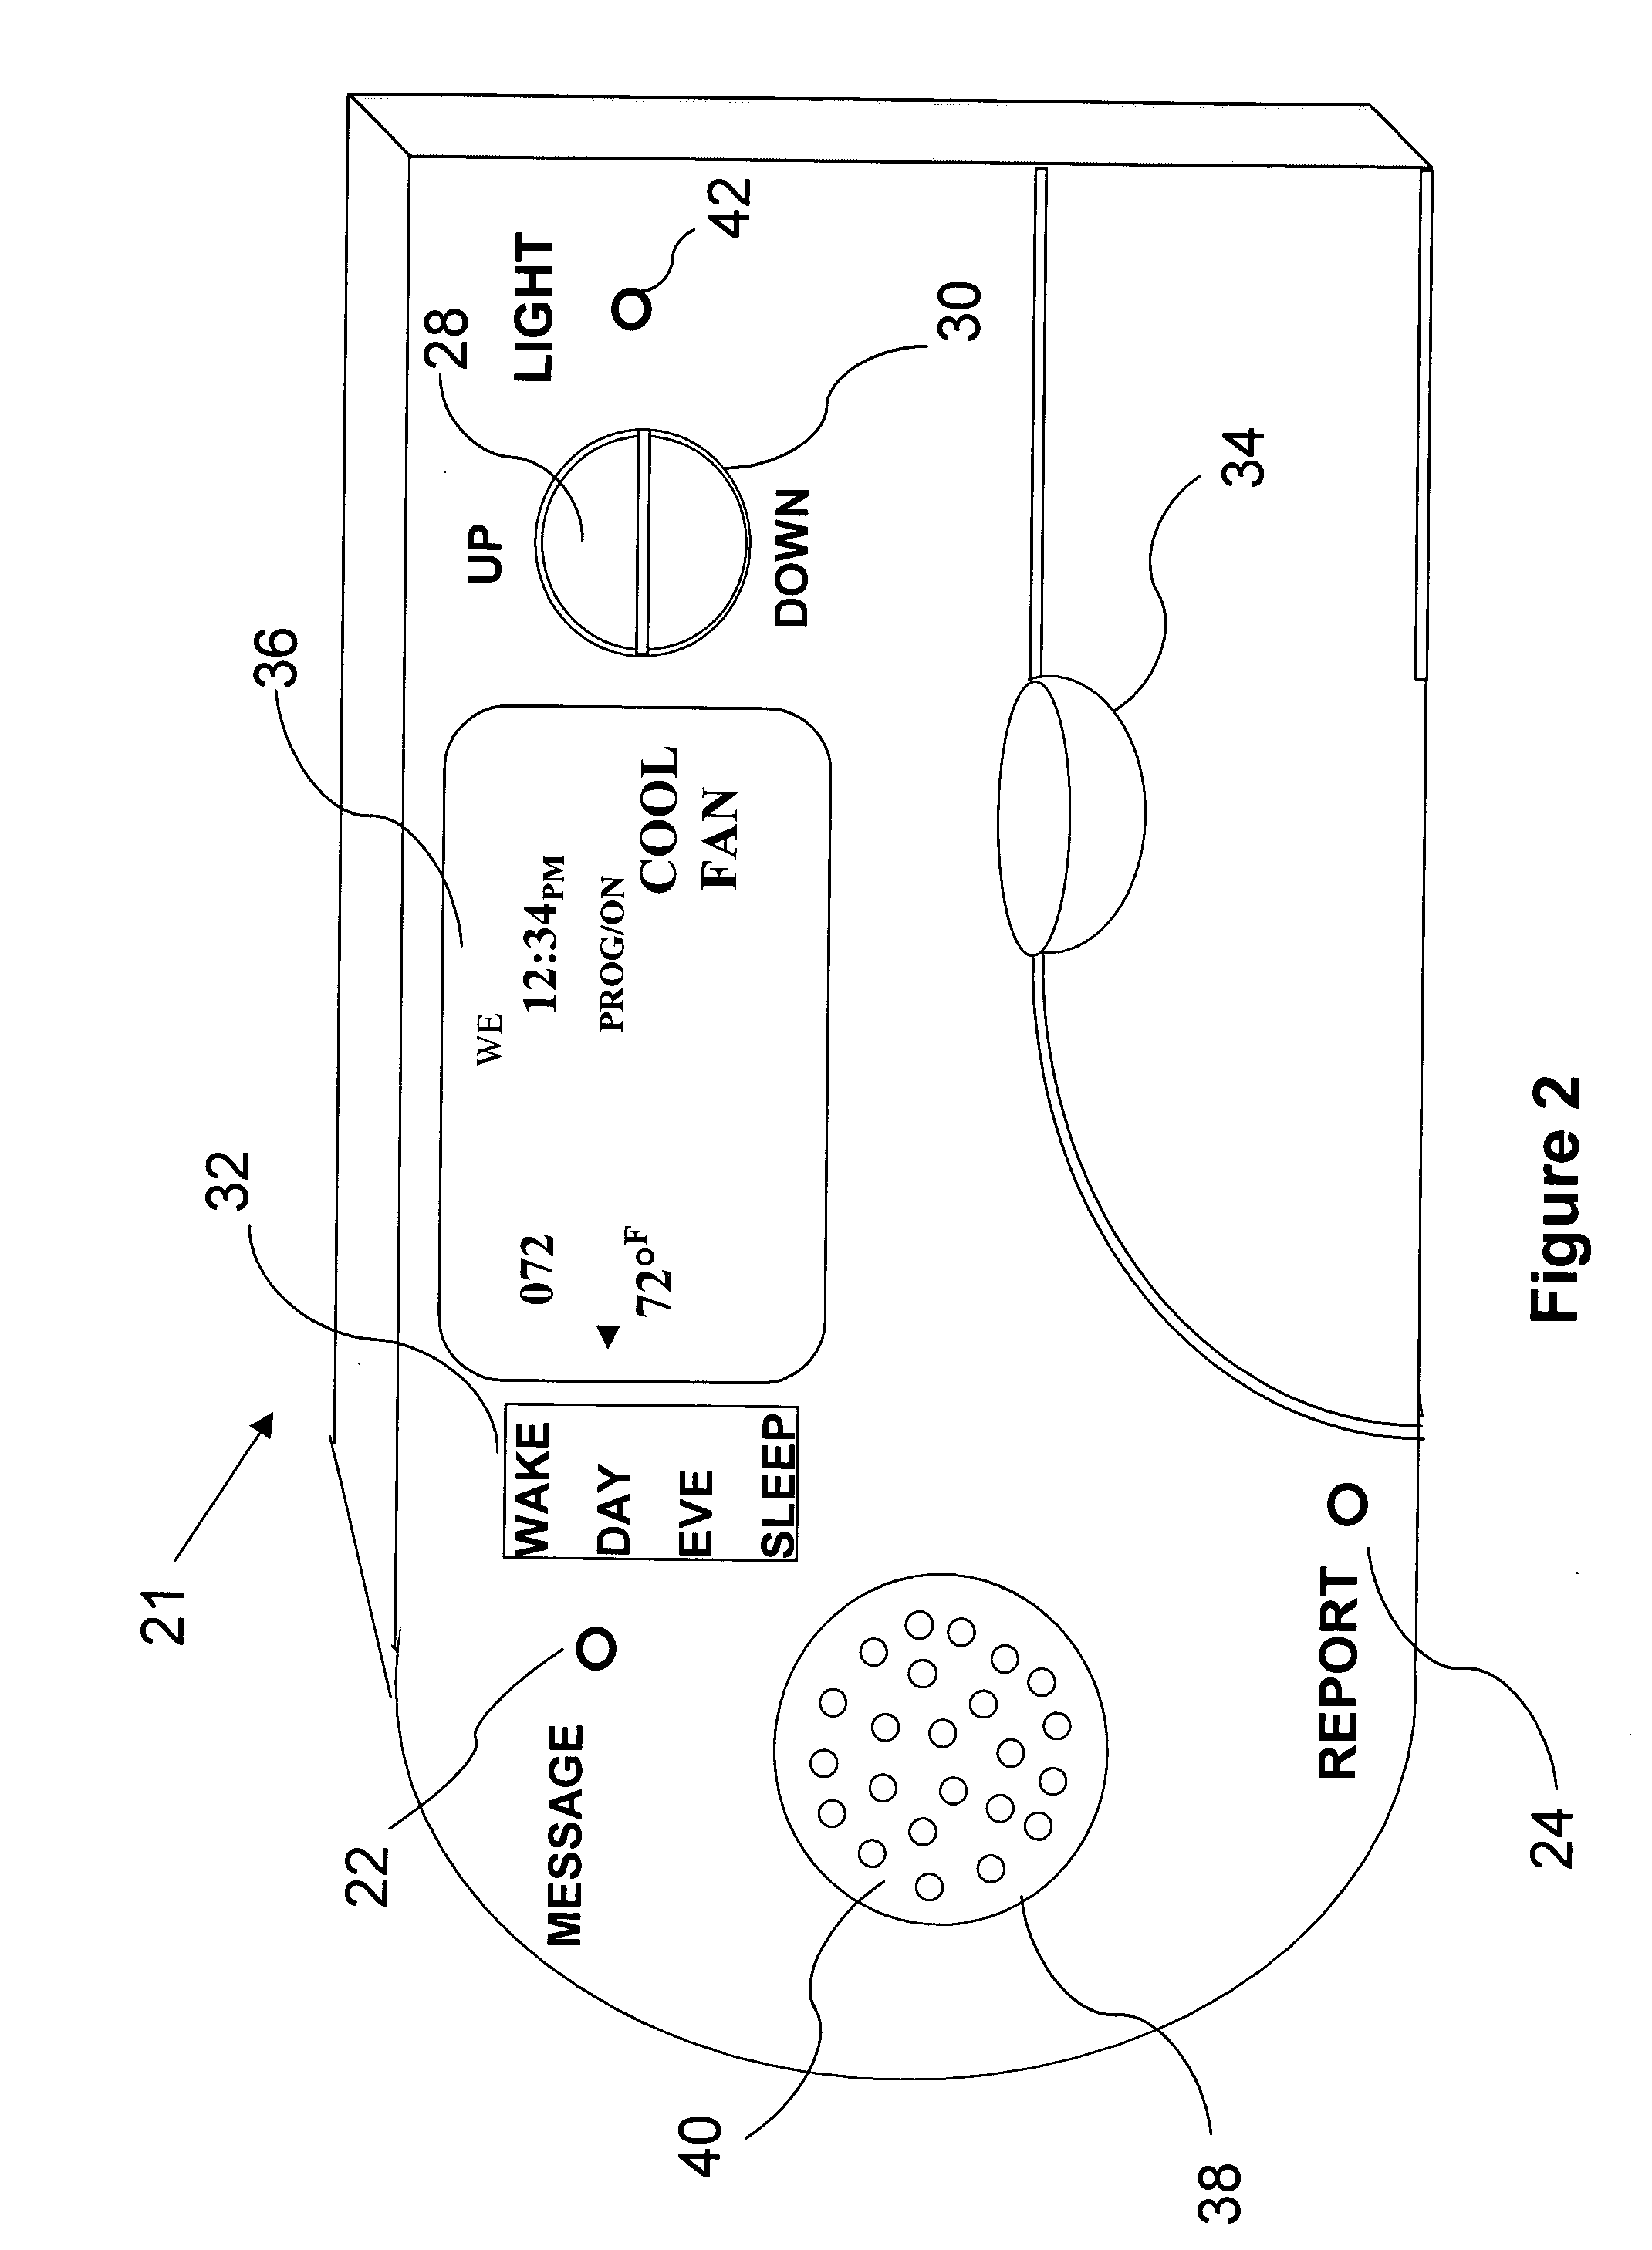 Device and method for interactive programming of a thermostat